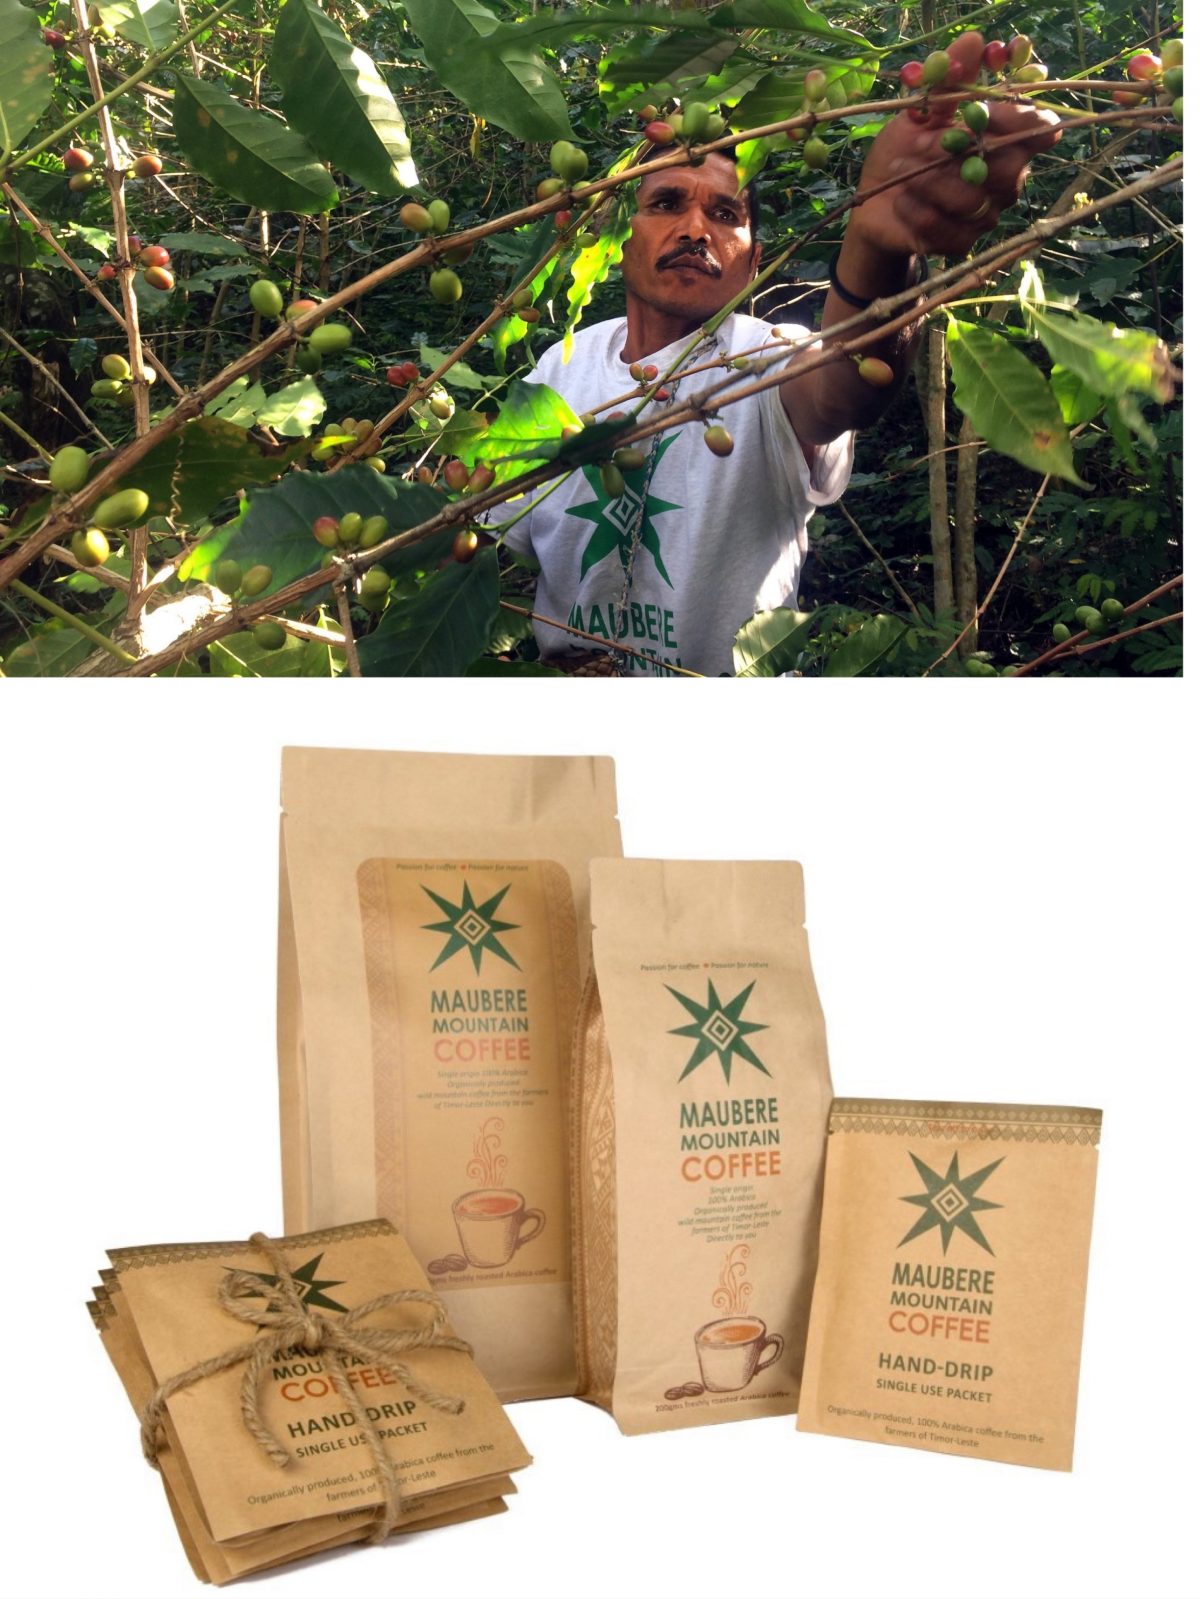 Maubere Mountain Coffee offers 20% off. To support farmers in-need, buy now!